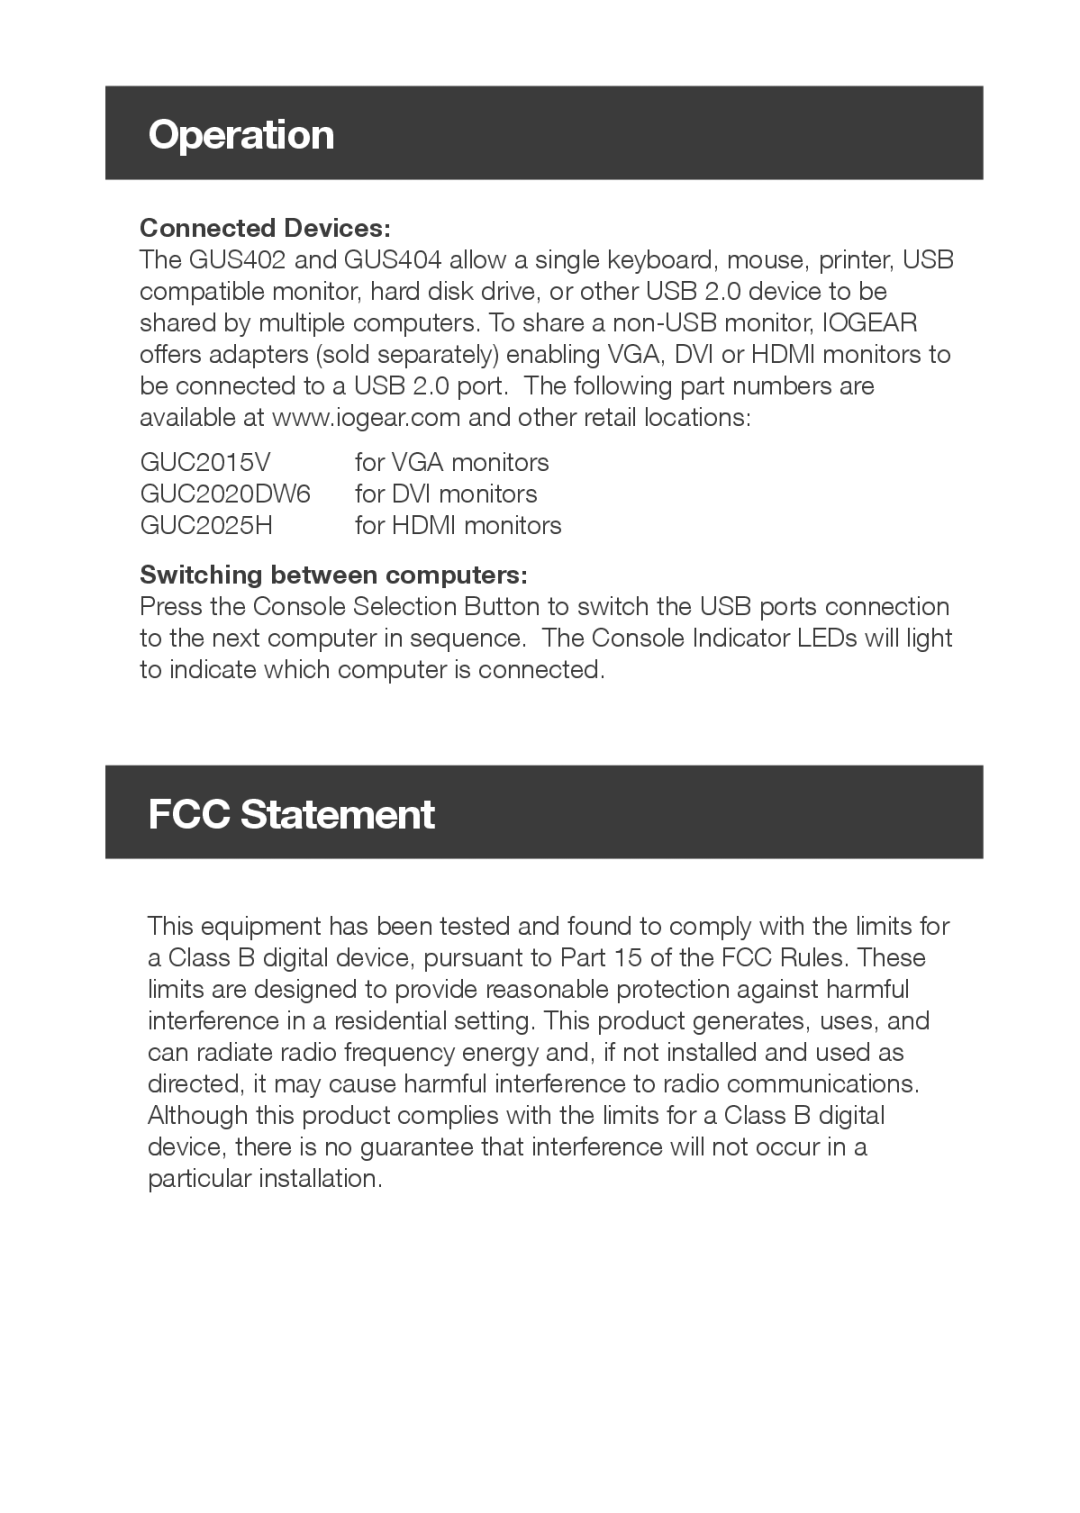 IOGear GUS402 / GUS404 quick start Operation, FCC Statement, Connected Devices, Switching between computers 